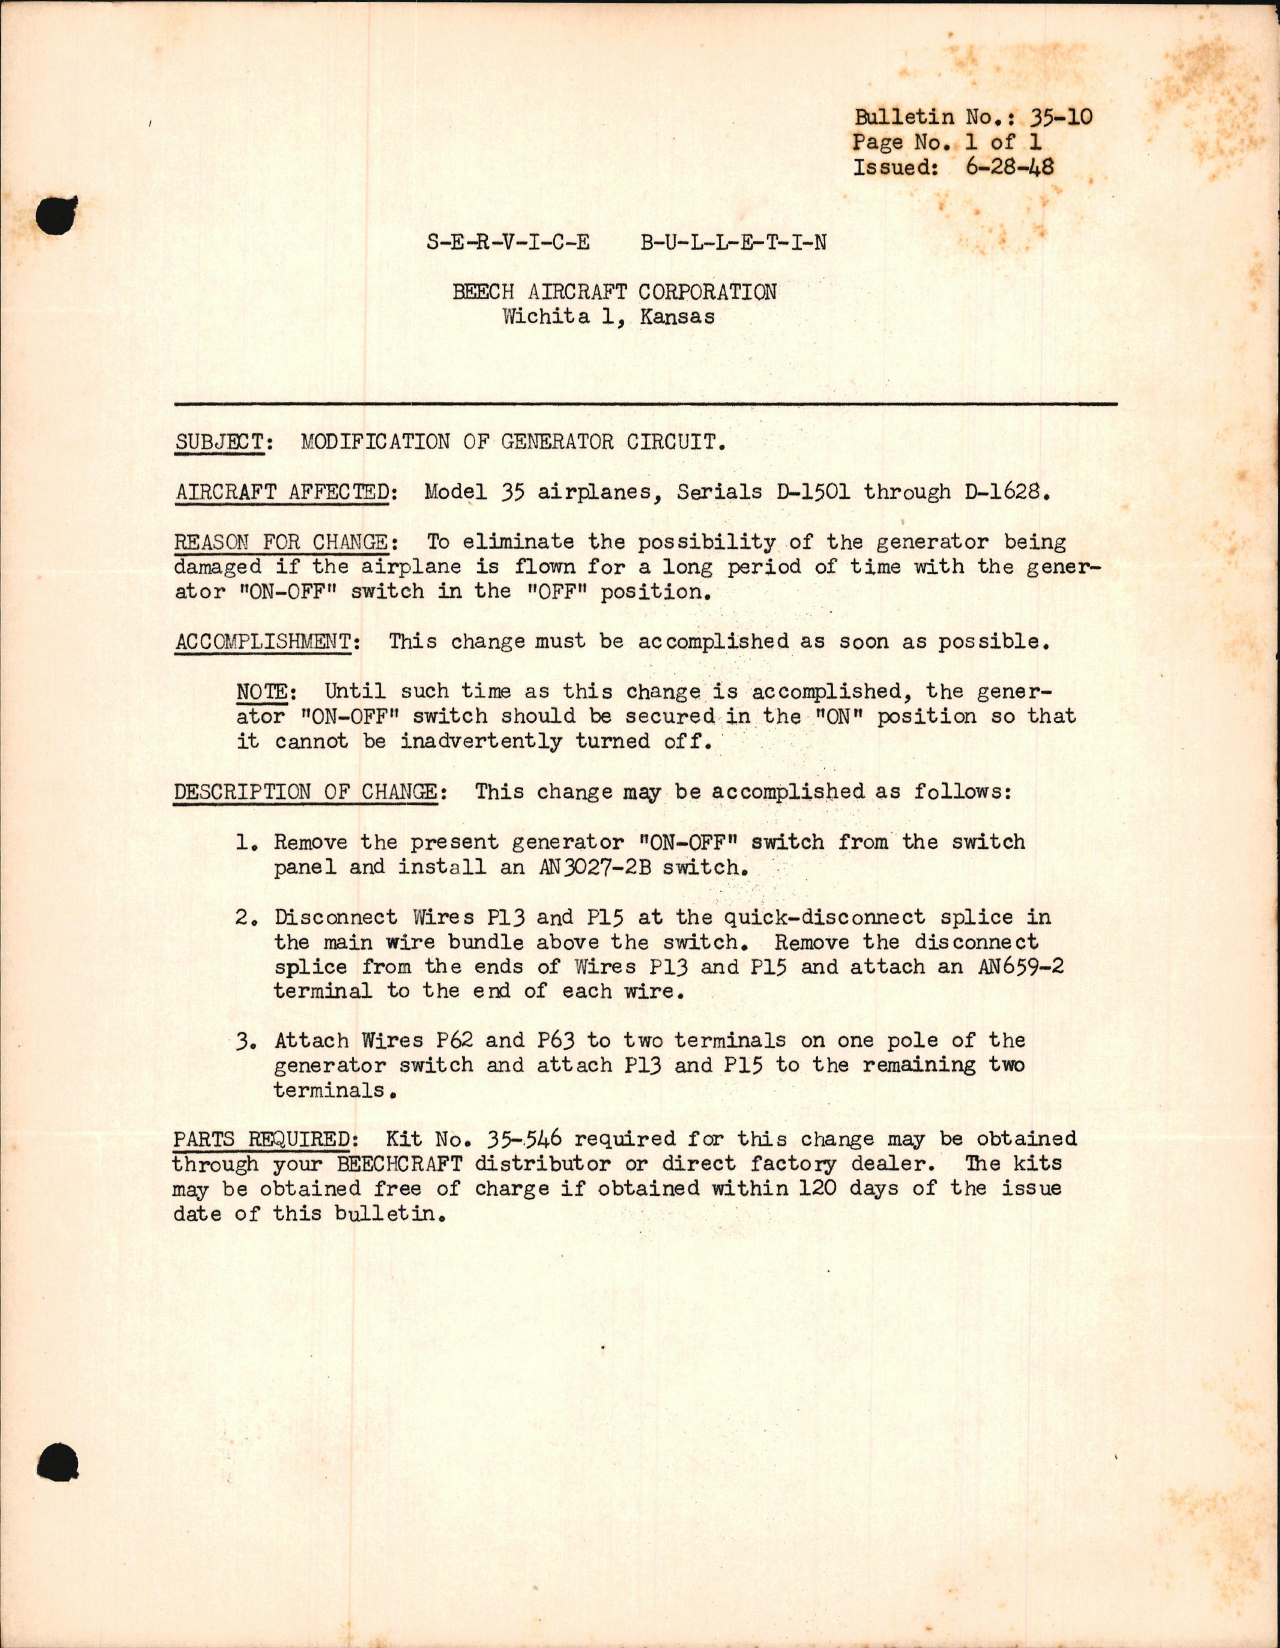 Sample page 1 from AirCorps Library document: Modification of Generator Circuit